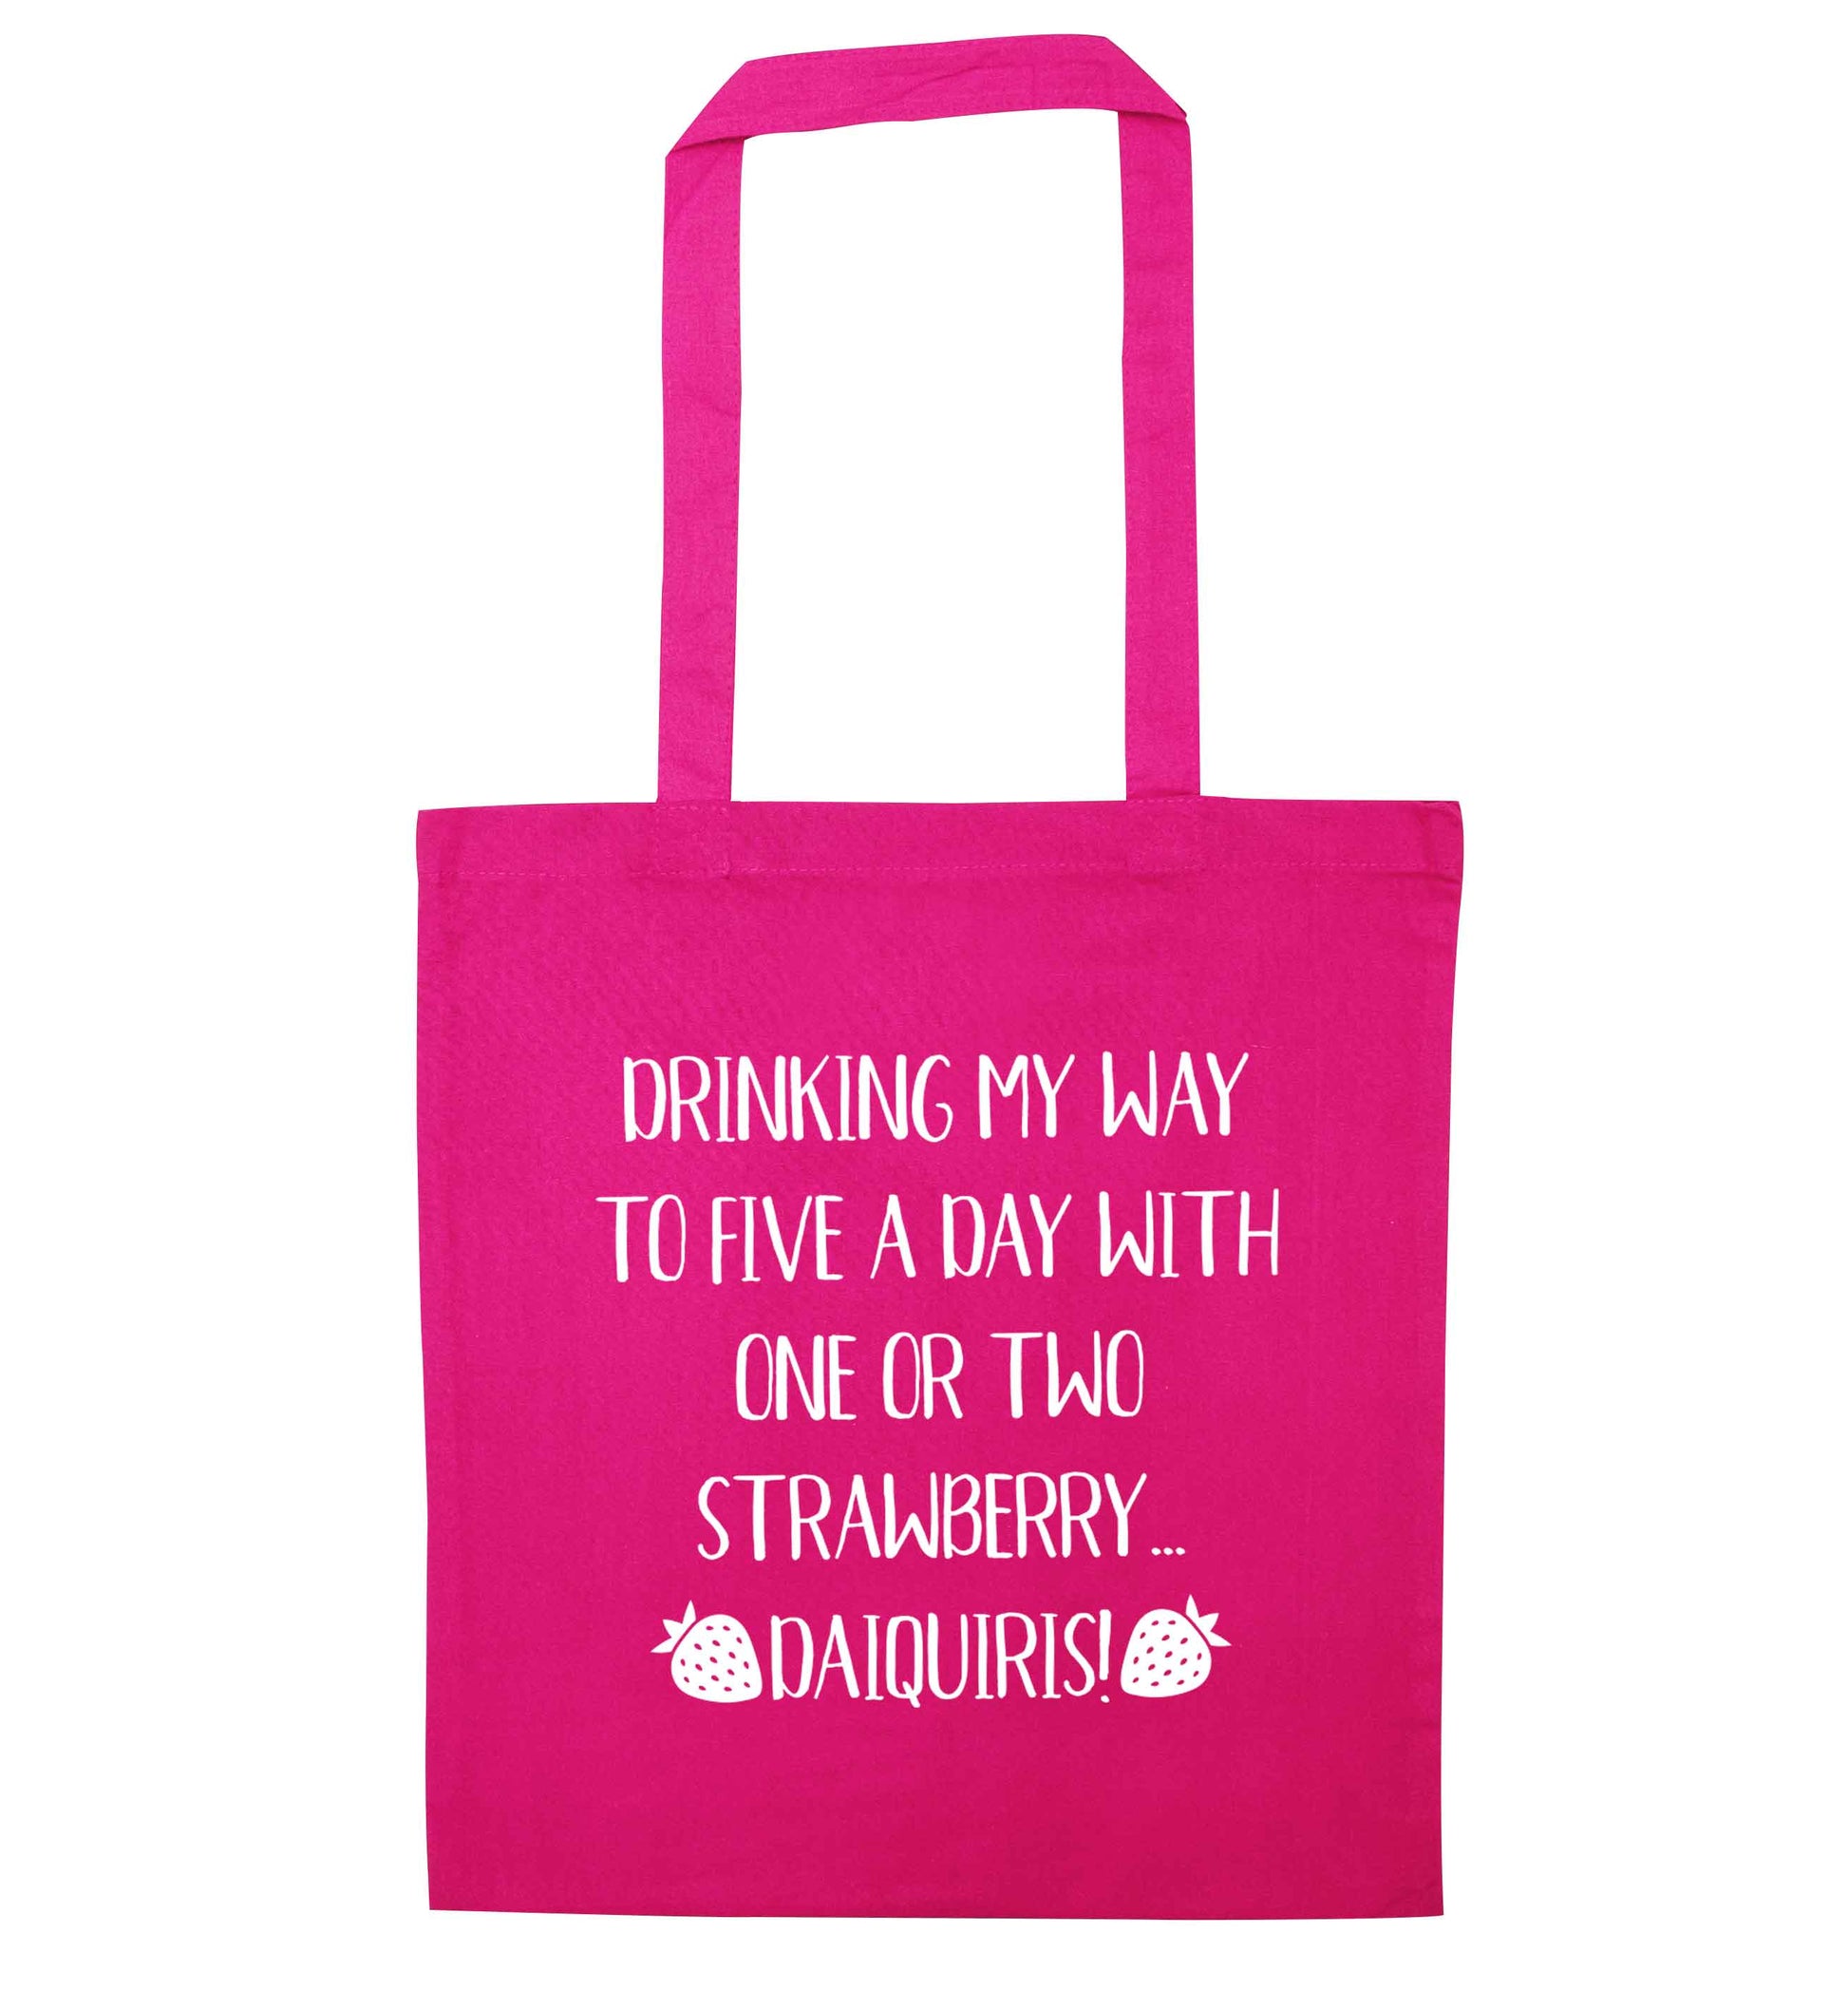 Drinking my way to five a day with one or two straberry daiquiris pink tote bag